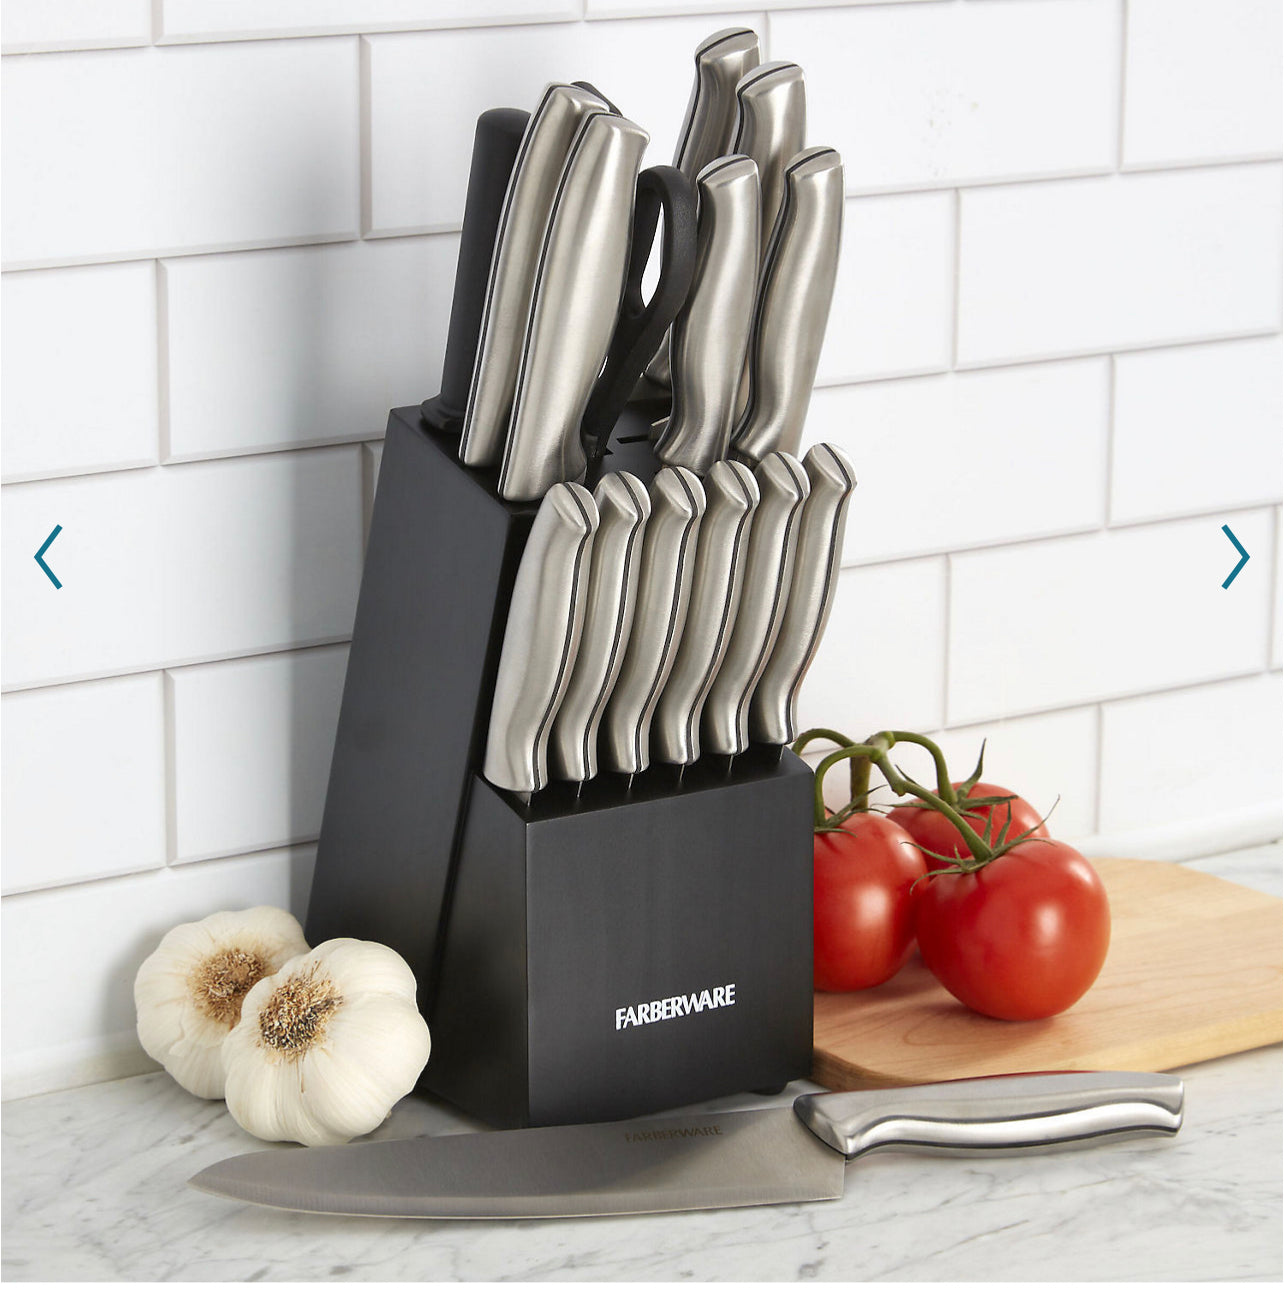 Farberware Platinum Kitchen Knife set Stainless steel 15 piece cutlery -  household items - by owner - housewares sale